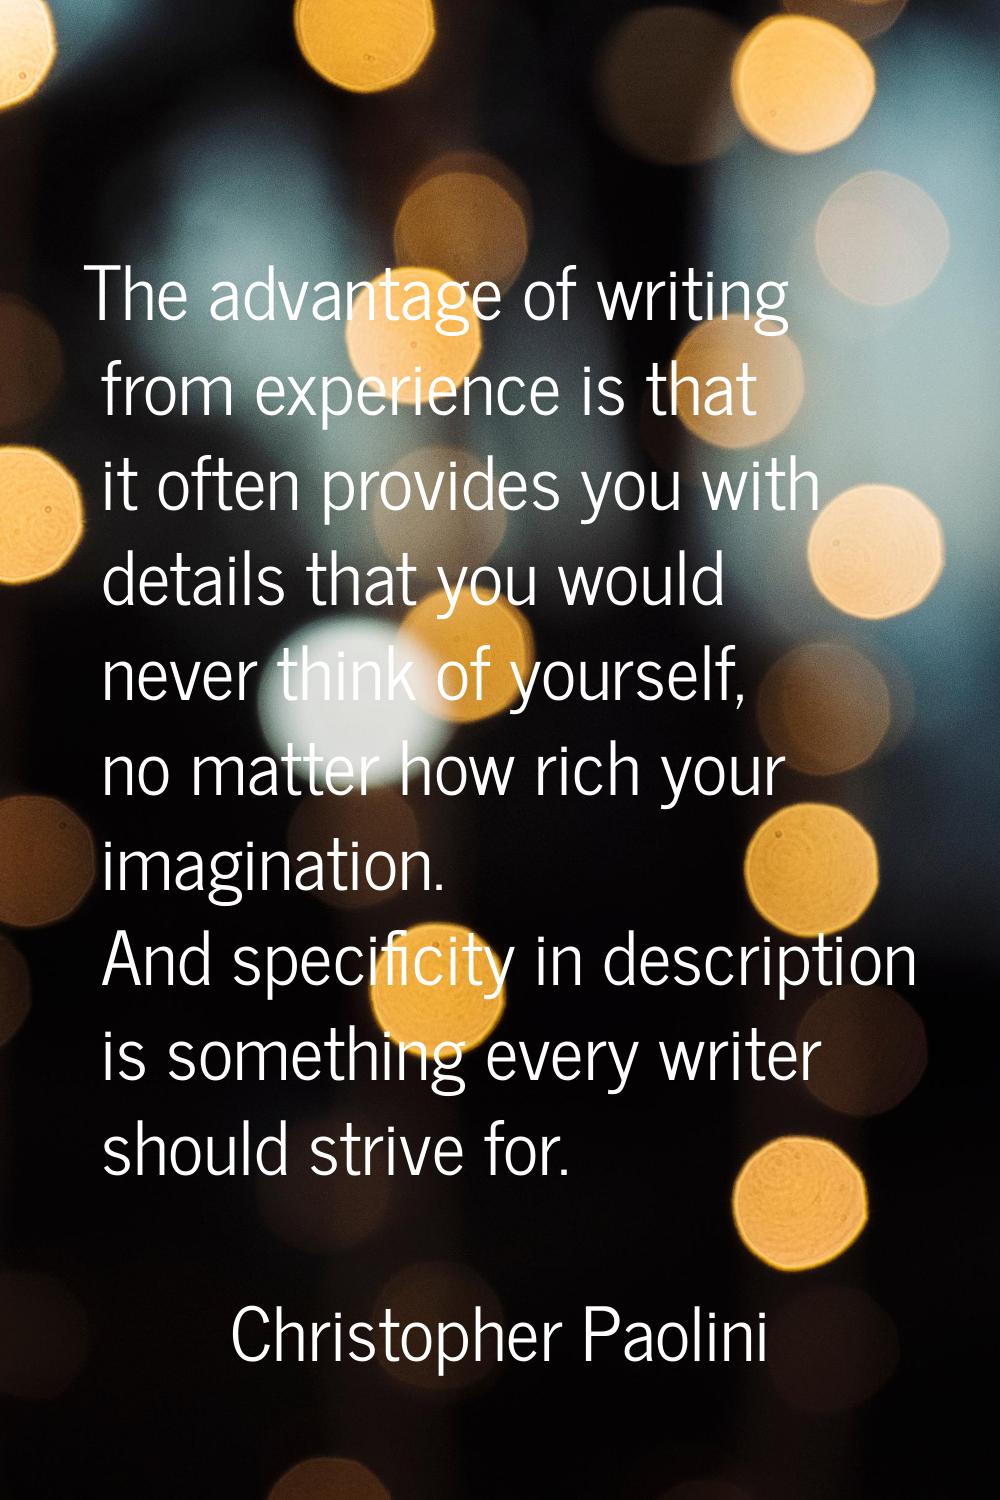 The advantage of writing from experience is that it often provides you with details that you would 